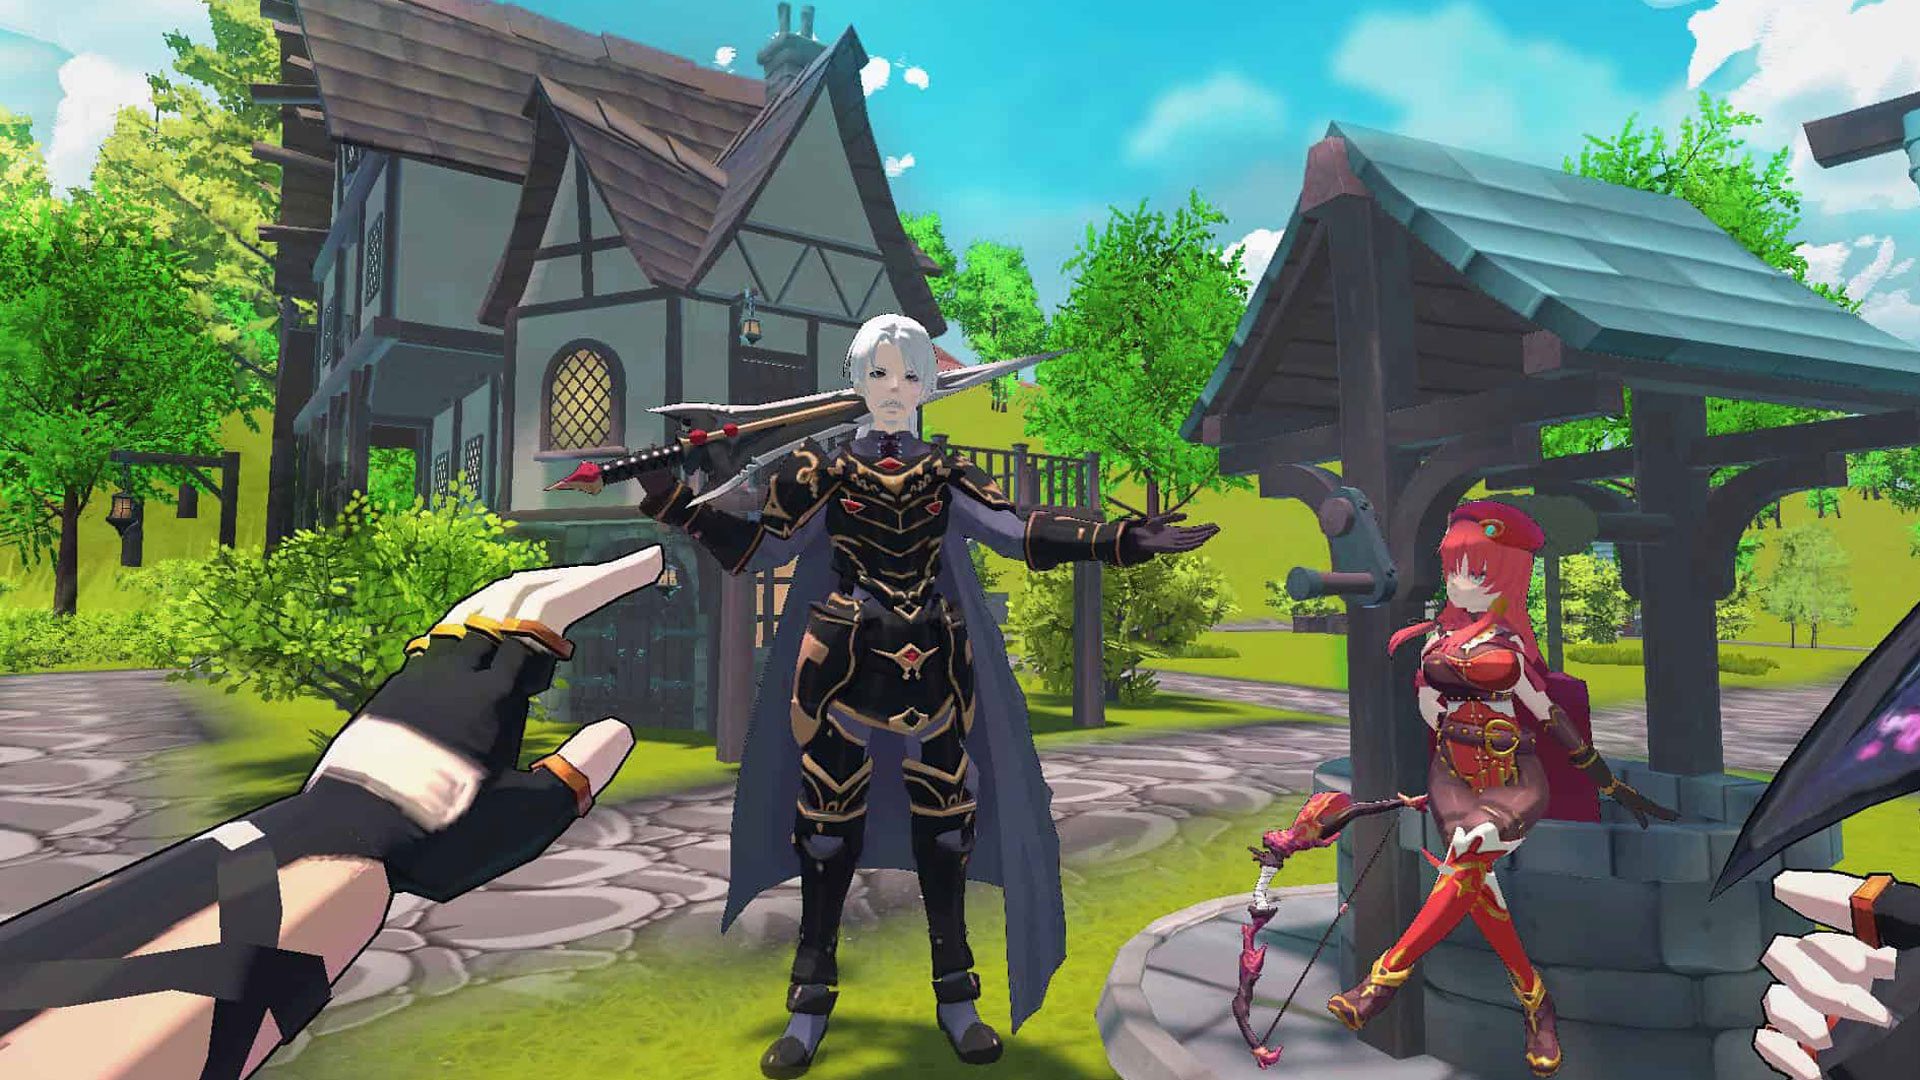 This Quest Pro Game Recreates Sword Art Online's Lovably Bad User